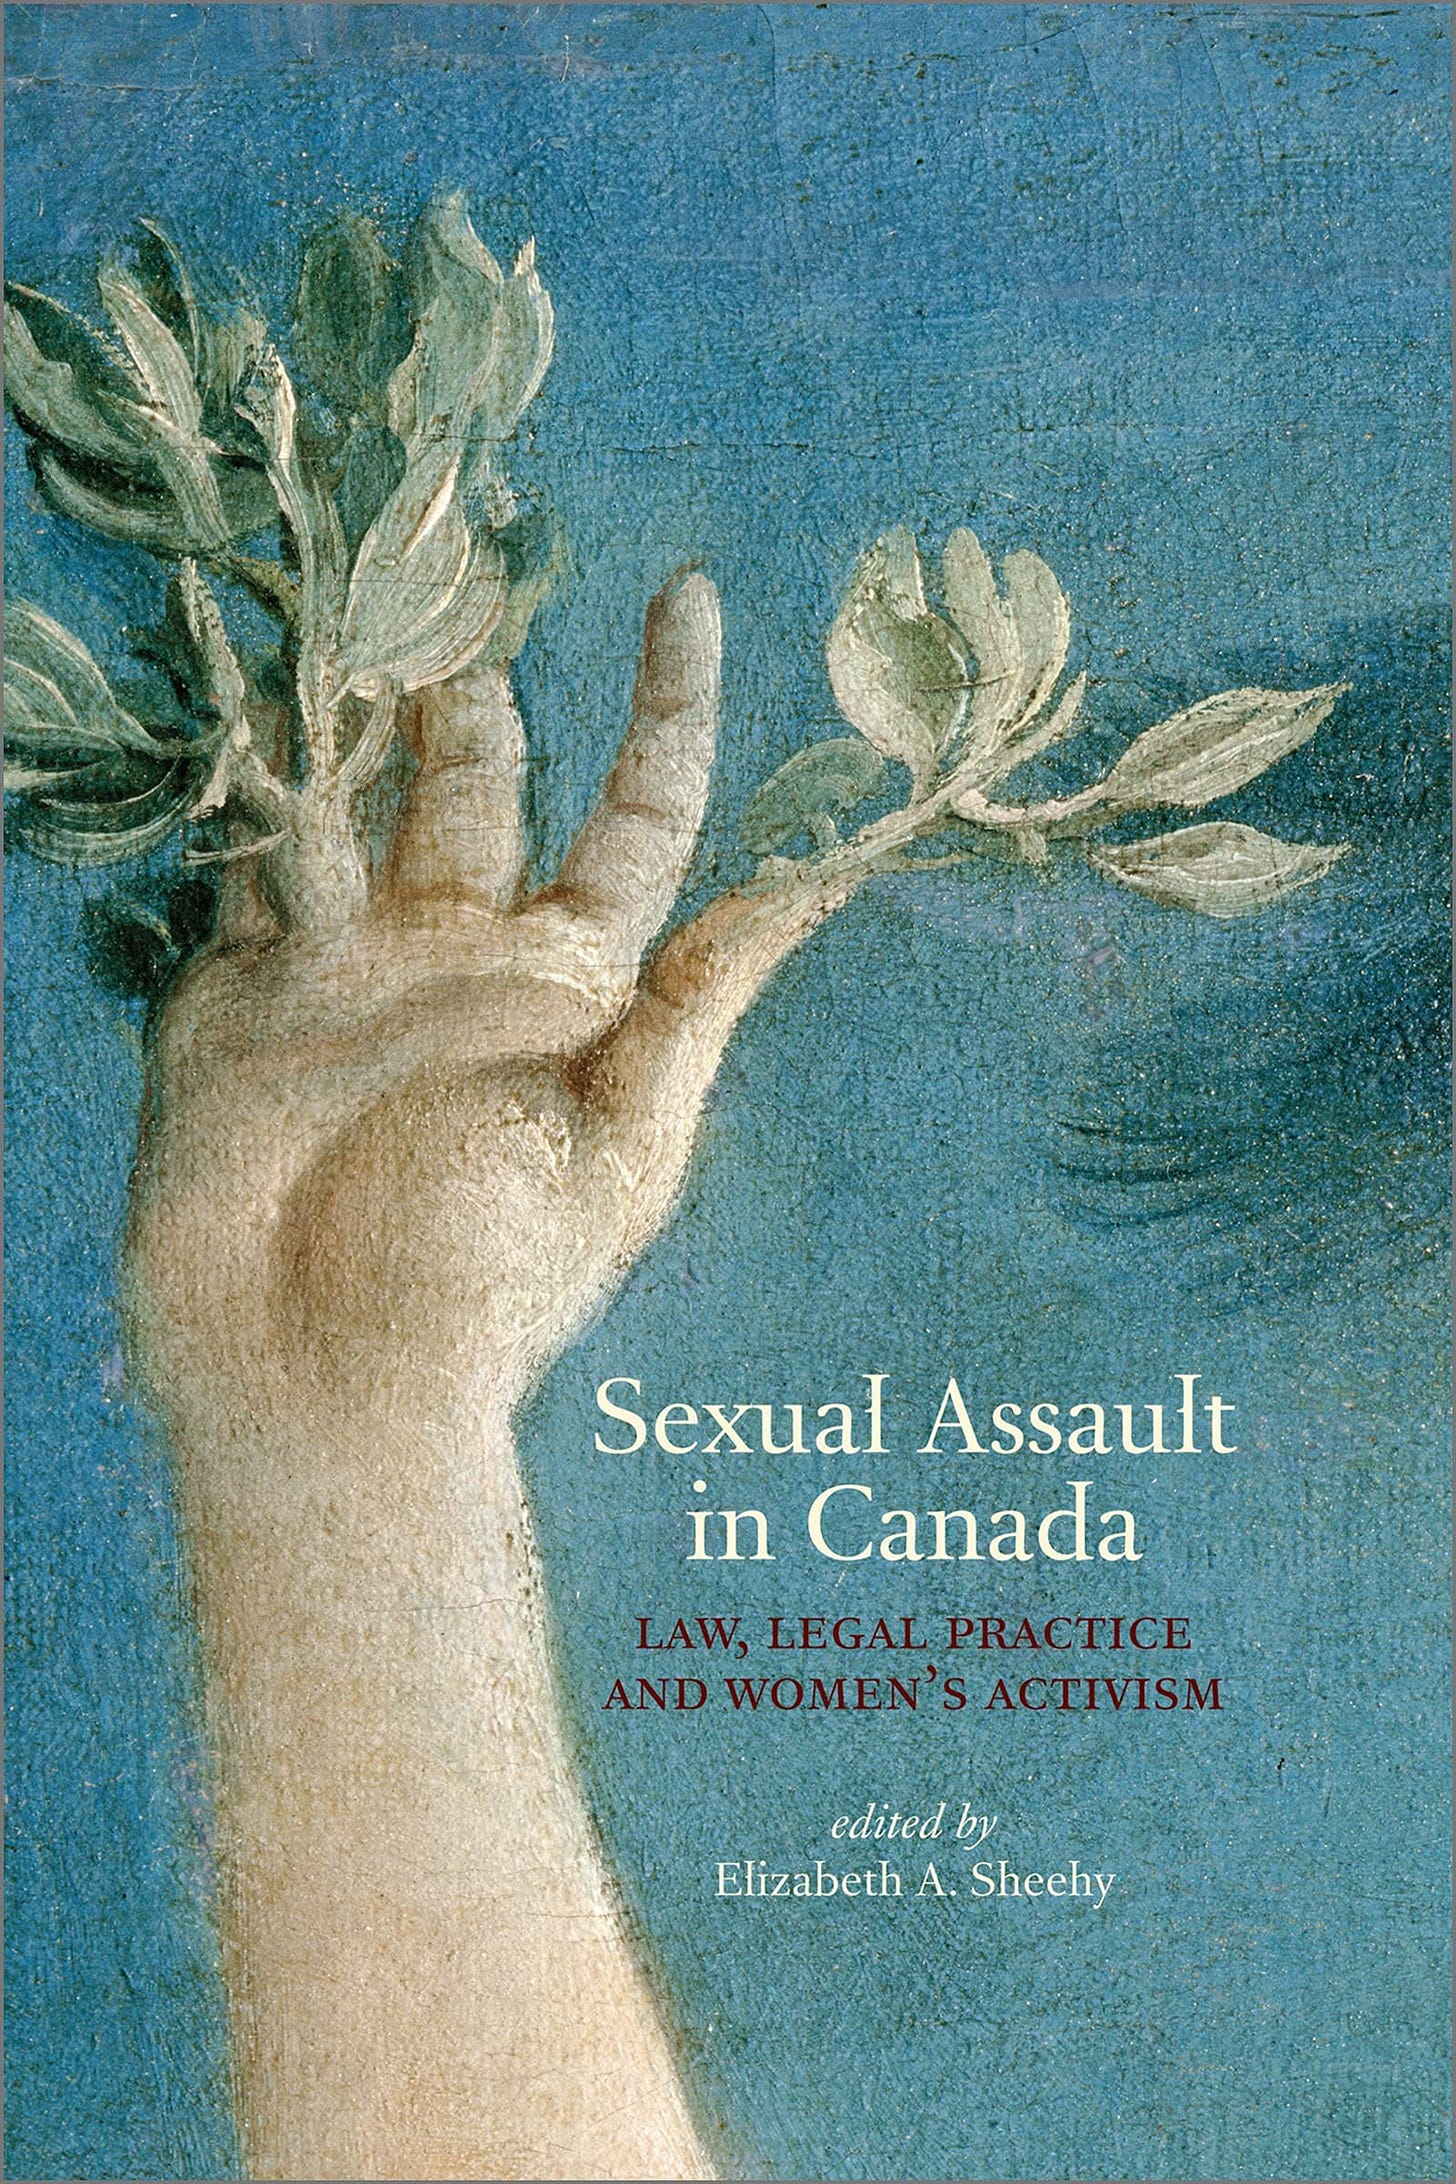 Sexual Assault in Canada: Law, Legal Practice and Women's Activism: Sheehy,  Elizabeth A.: 9780776630441: Books - Amazon.ca